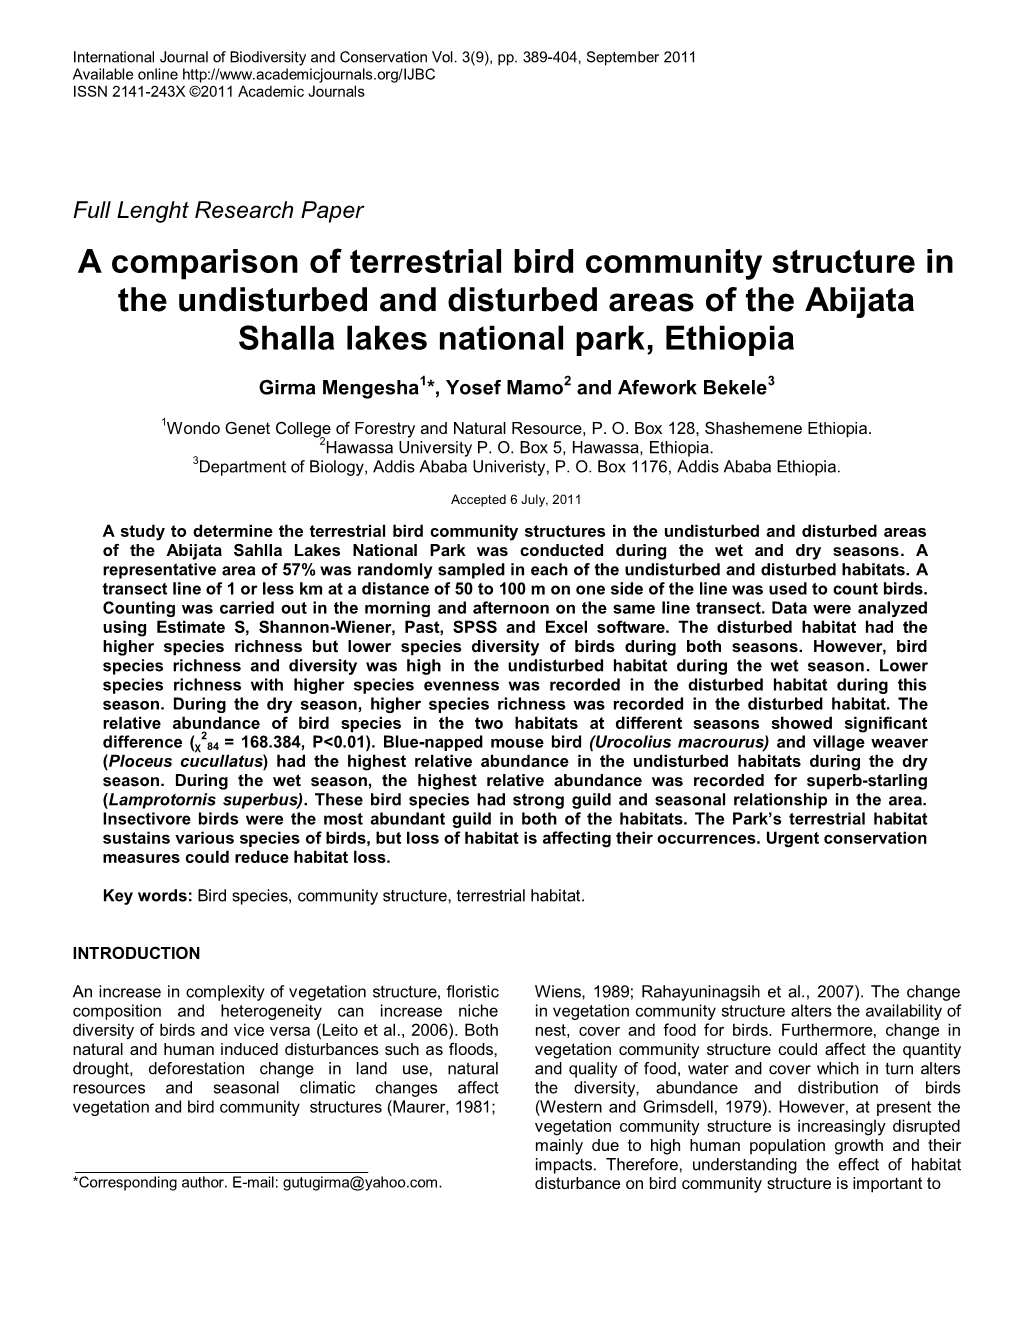 A Comparison of Terrestrial Bird Community Structure in the Undisturbed and Disturbed Areas of the Abijata Shalla Lakes National Park, Ethiopia